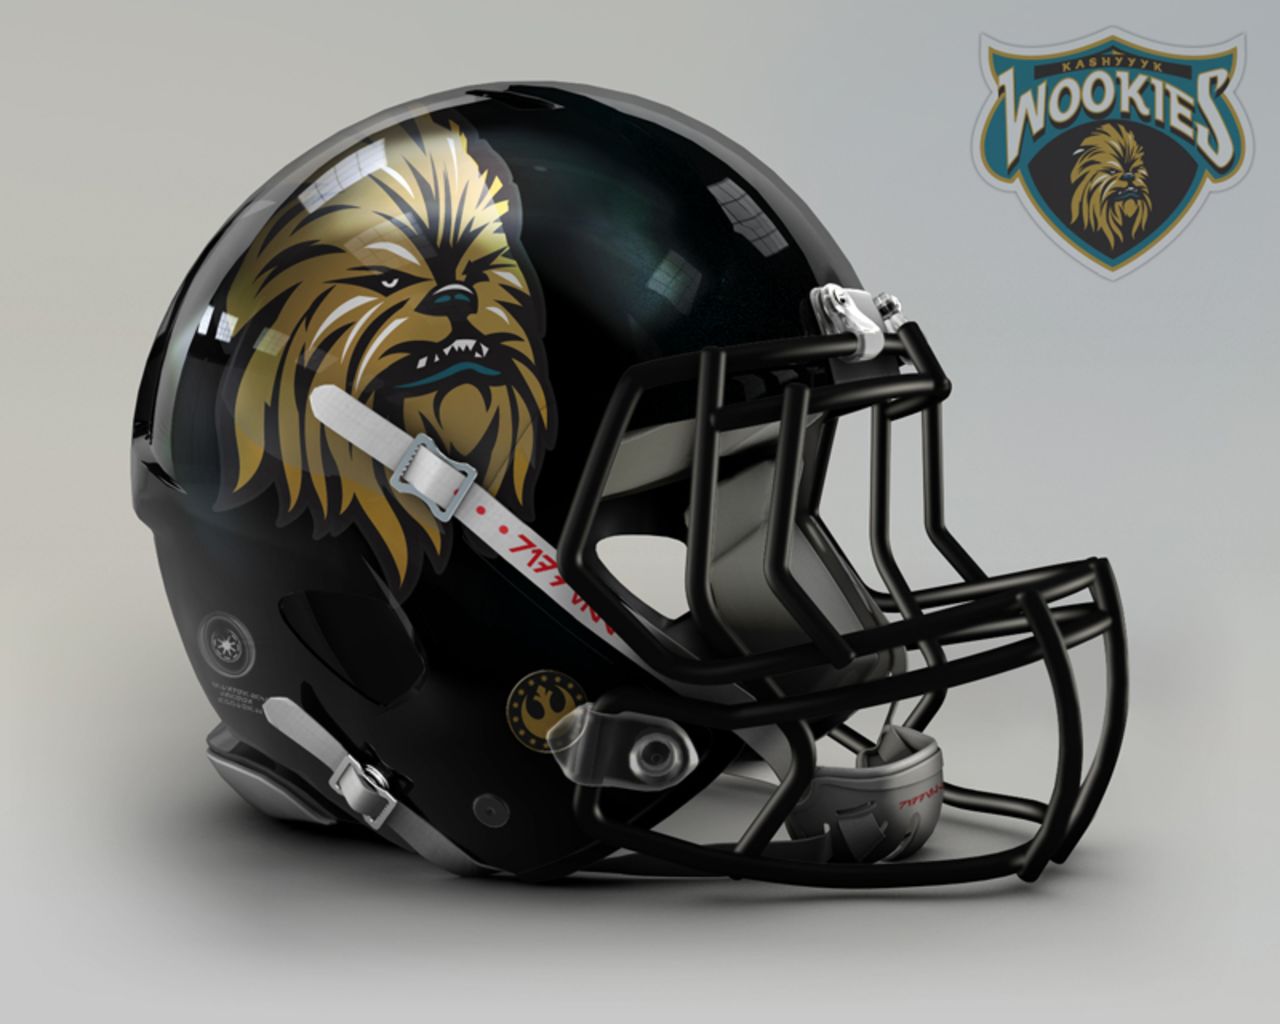 Chewbacca was inspired by George Lucas' dog Indiana, an Alaskan Malamute, but with a bit of mental choreography it's not hard to see it replace a feline on the helmet of the <a href="http://www.jaguars.com/" target="_blank" target="_blank">Jacksonville Jaguars</a>.